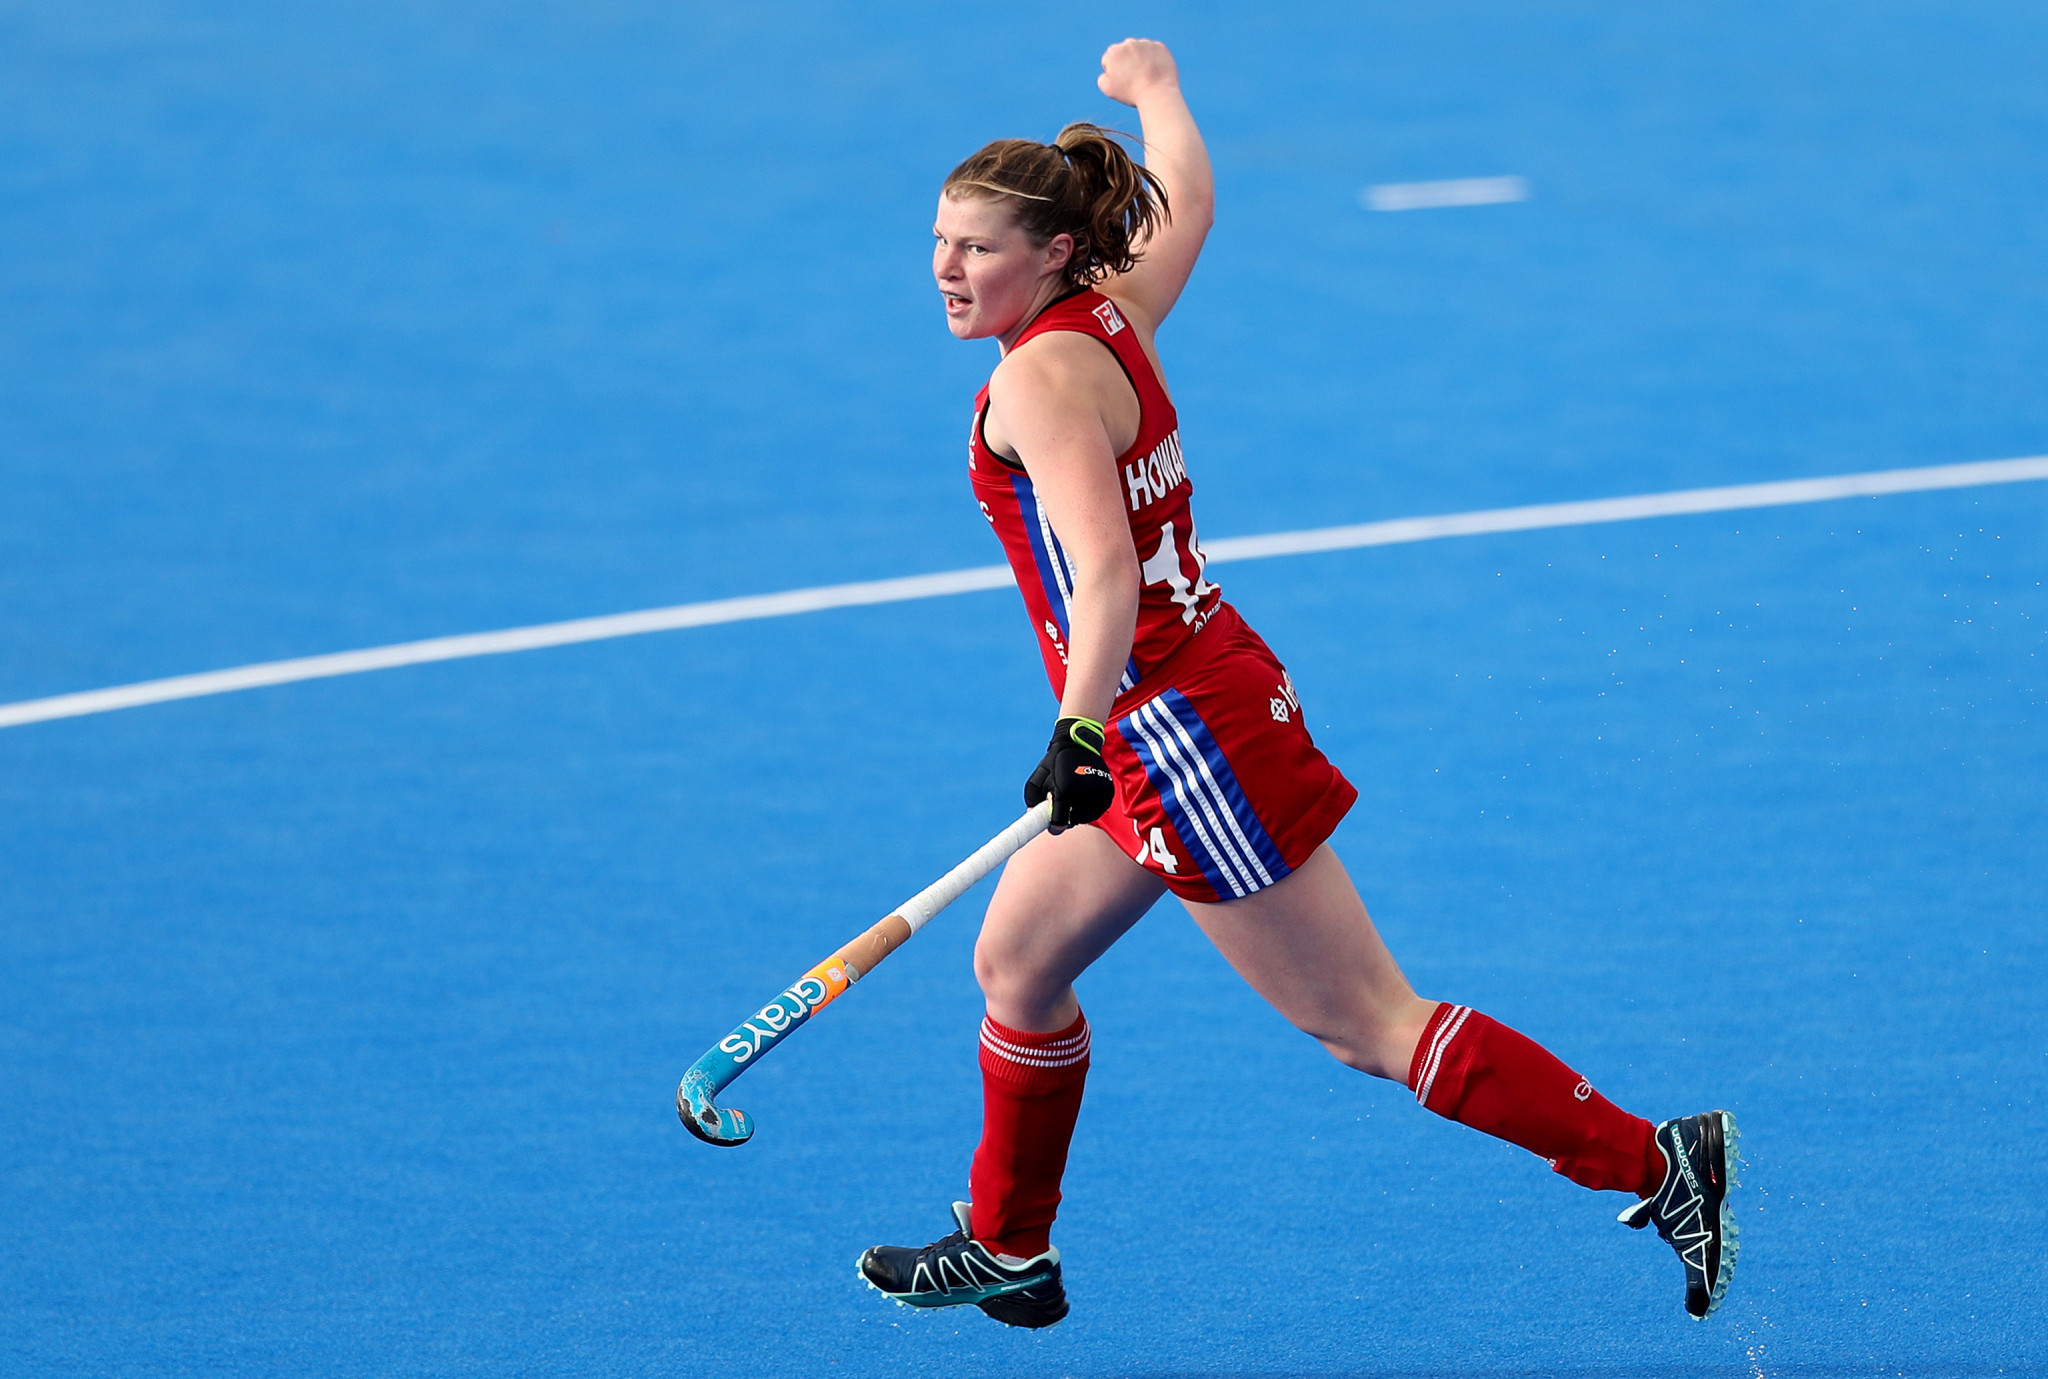 Tessa Howard scored in England's comeback against Belgium ©Getty Images